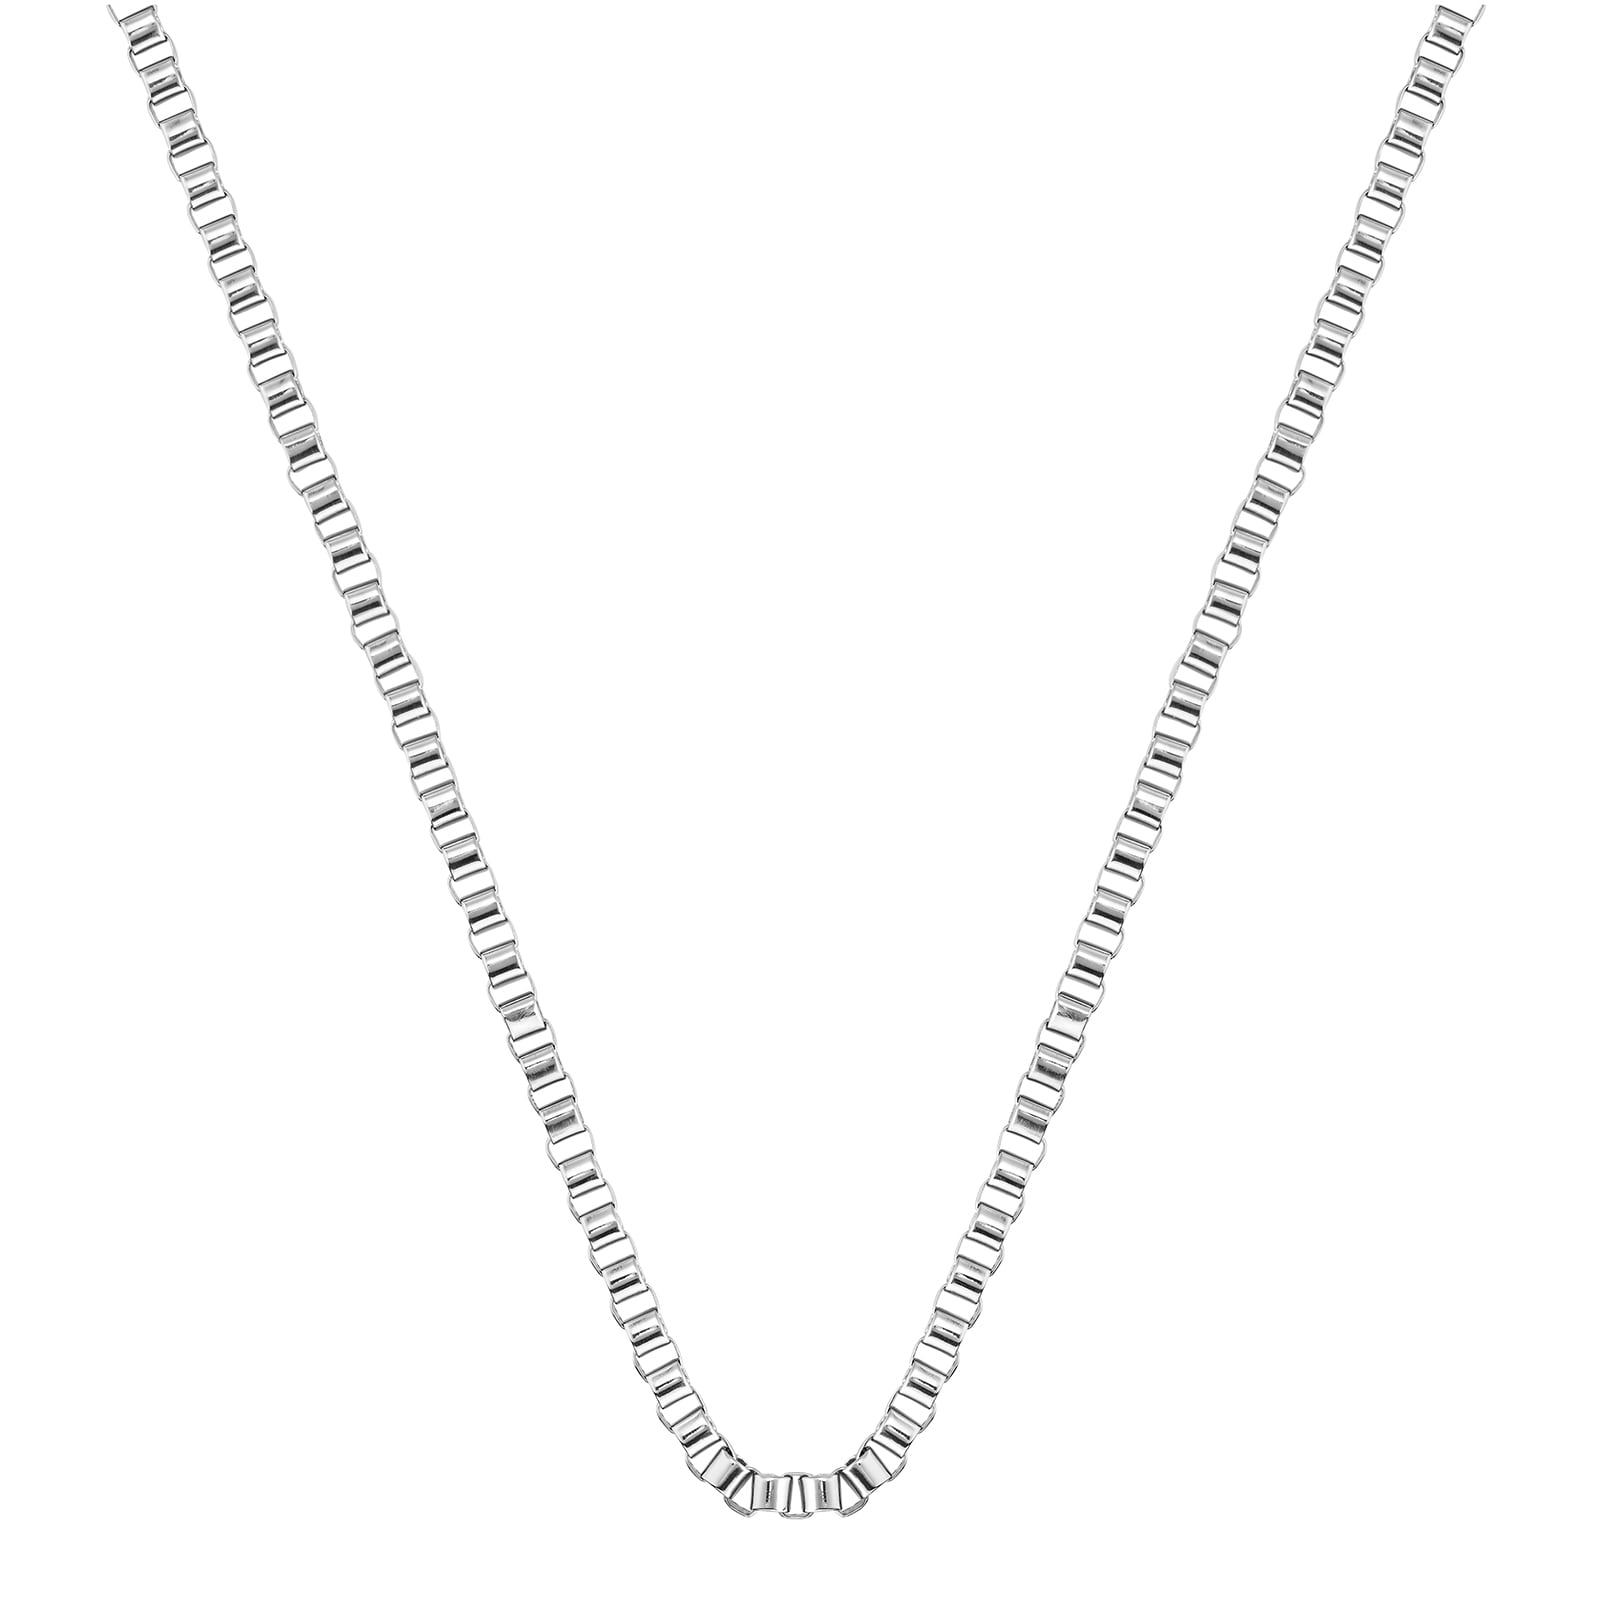 Stainless Steel Chain For Him Necklace